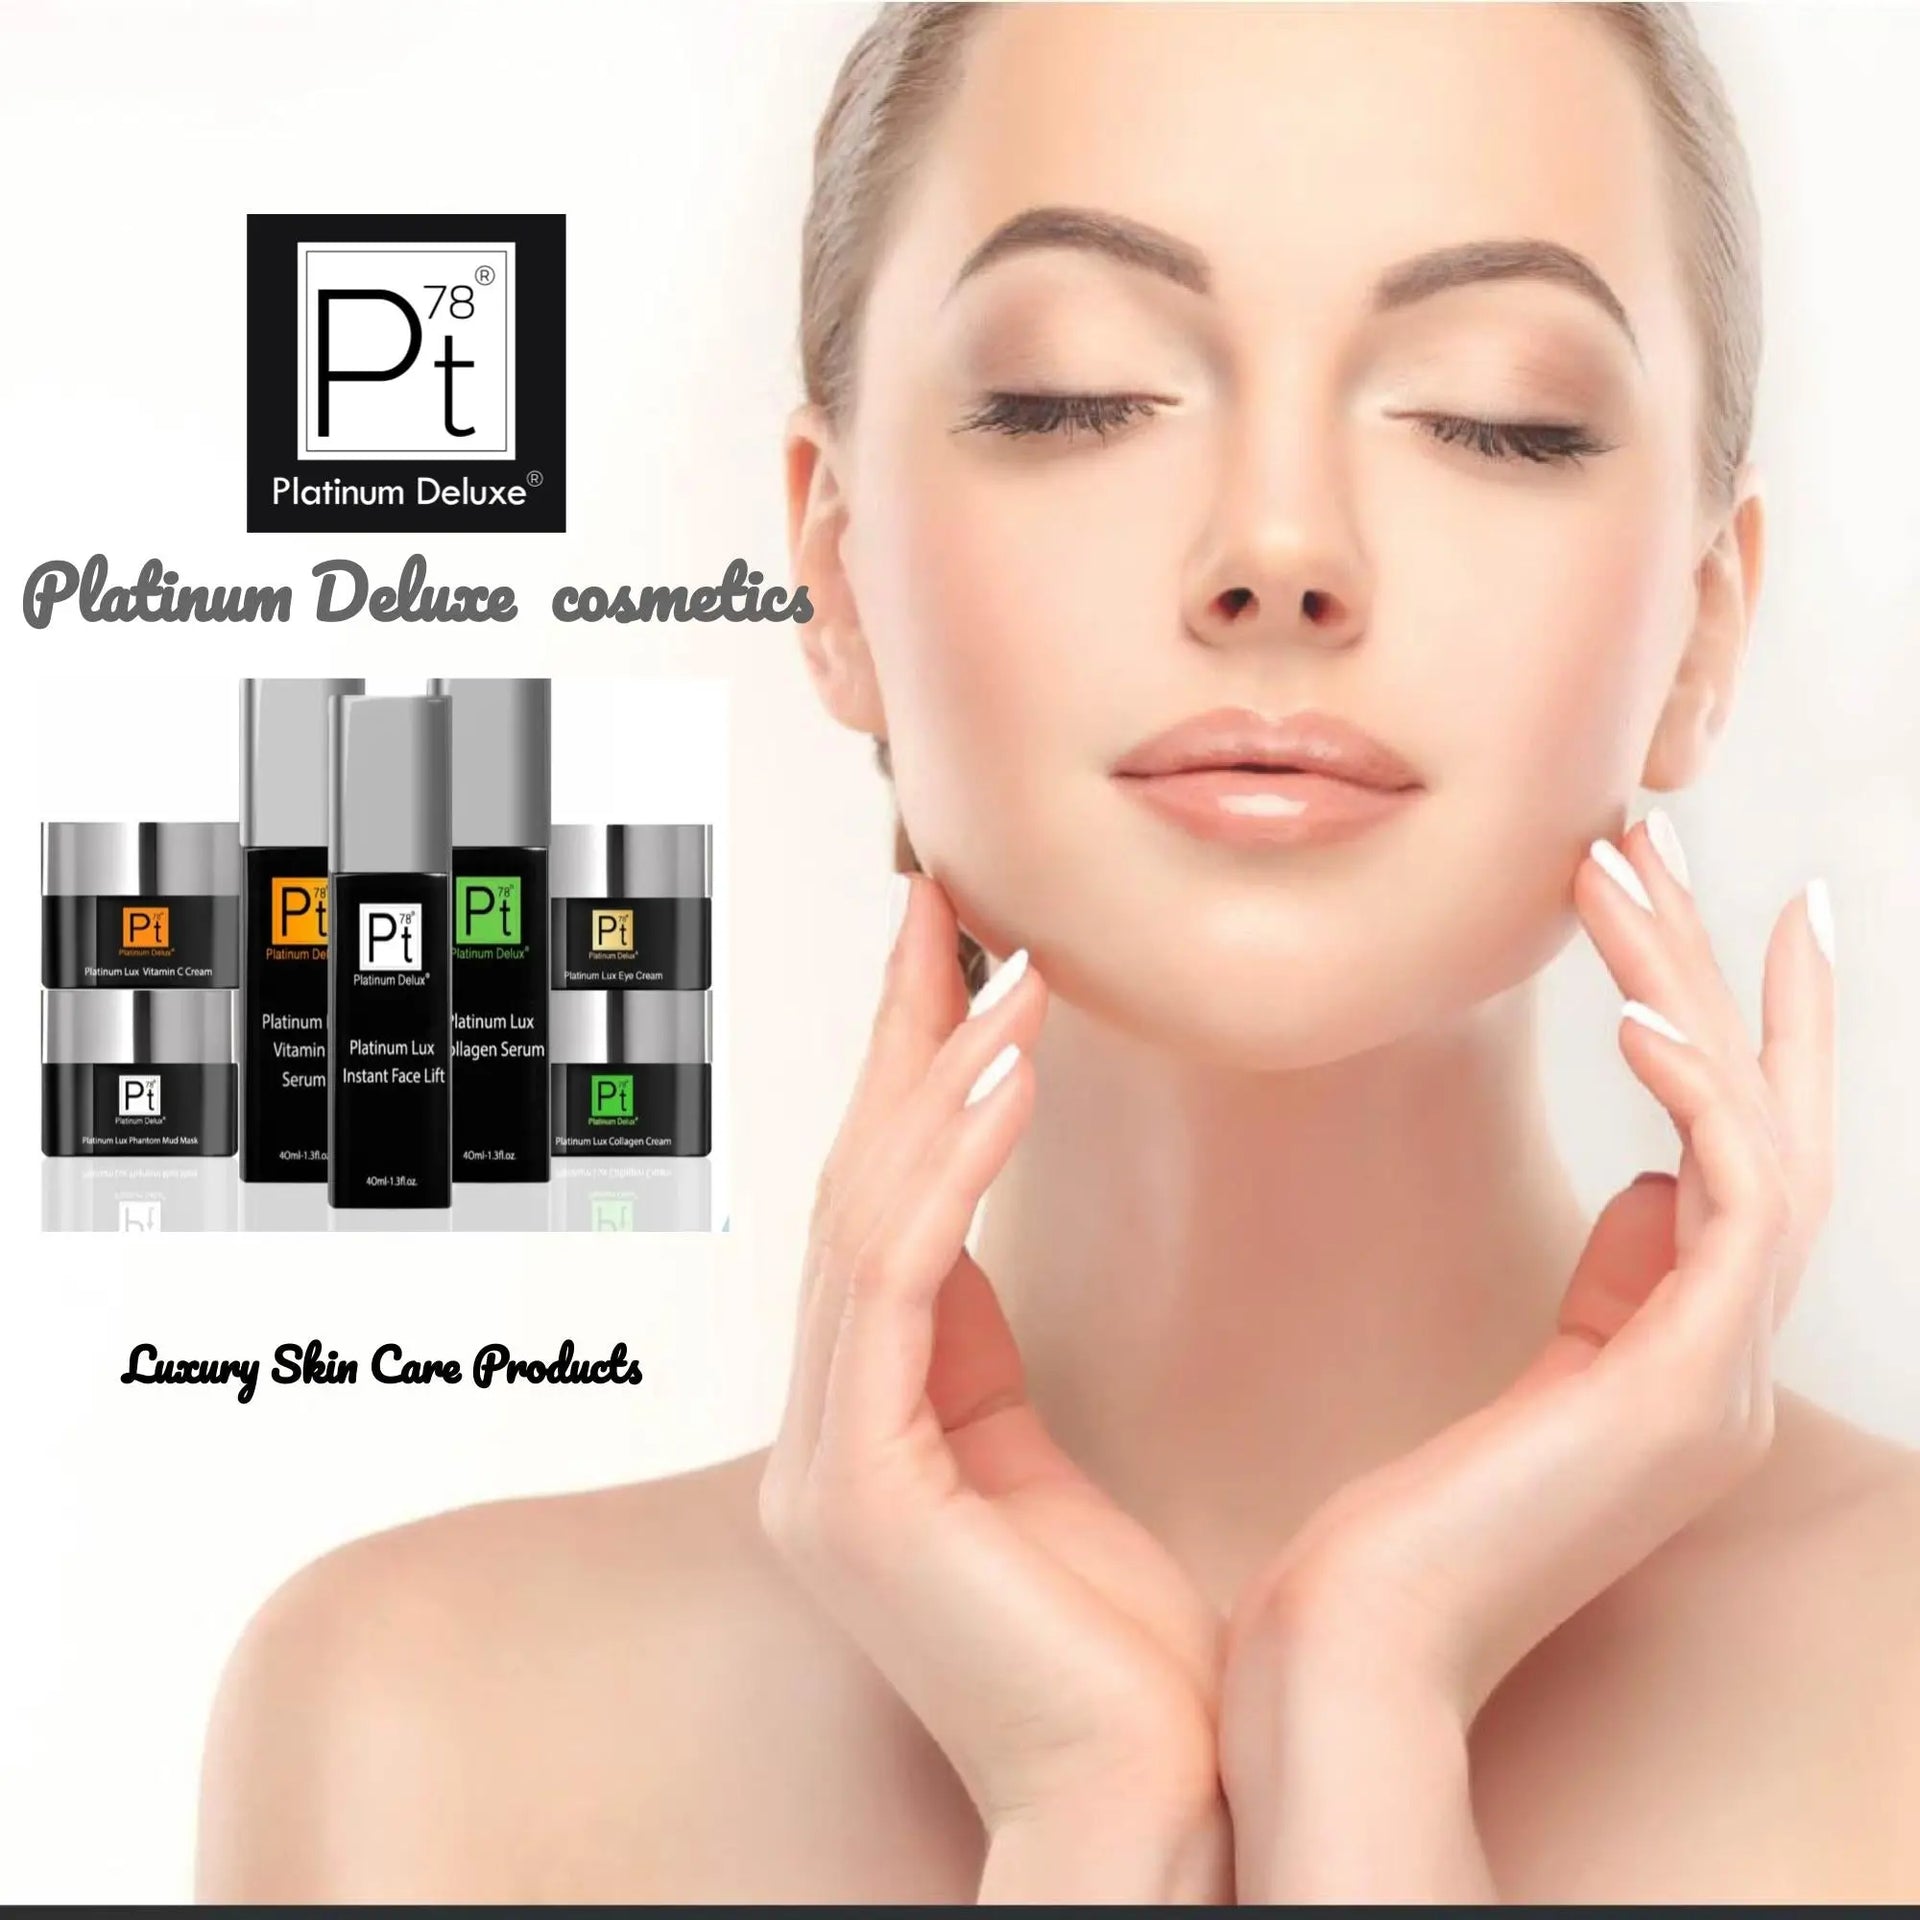 How much do you know about Platinum Deluxe Cosmetics? Discover all the interesting facts about this product Platinum Delux ®